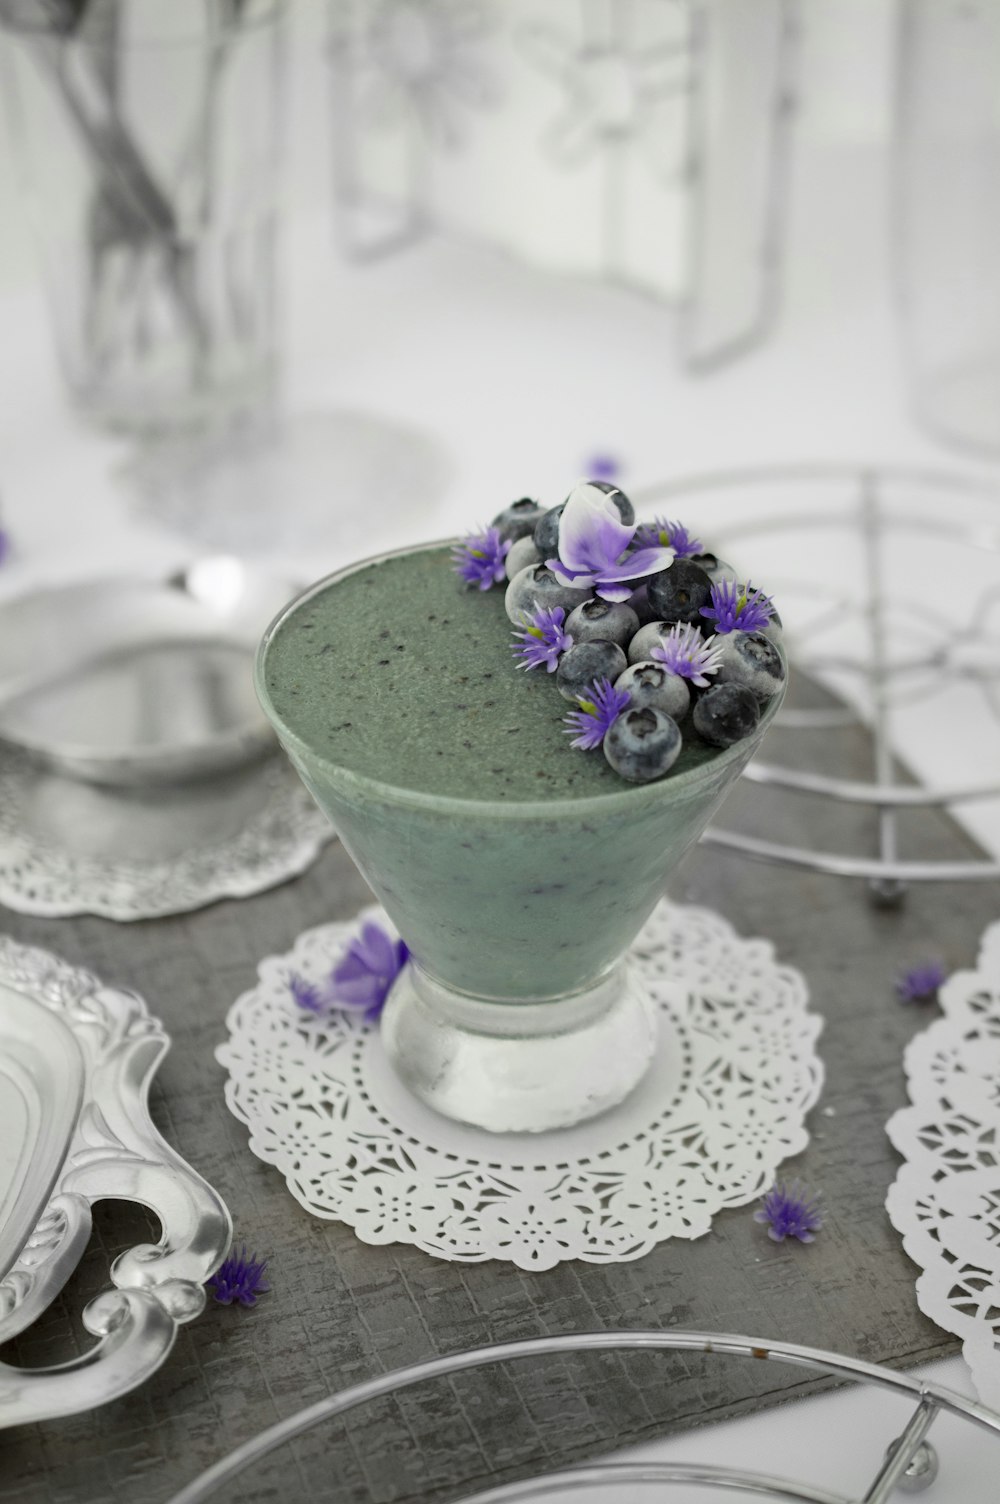 blueberries and purple-petaled flowers on top on clear glass cup